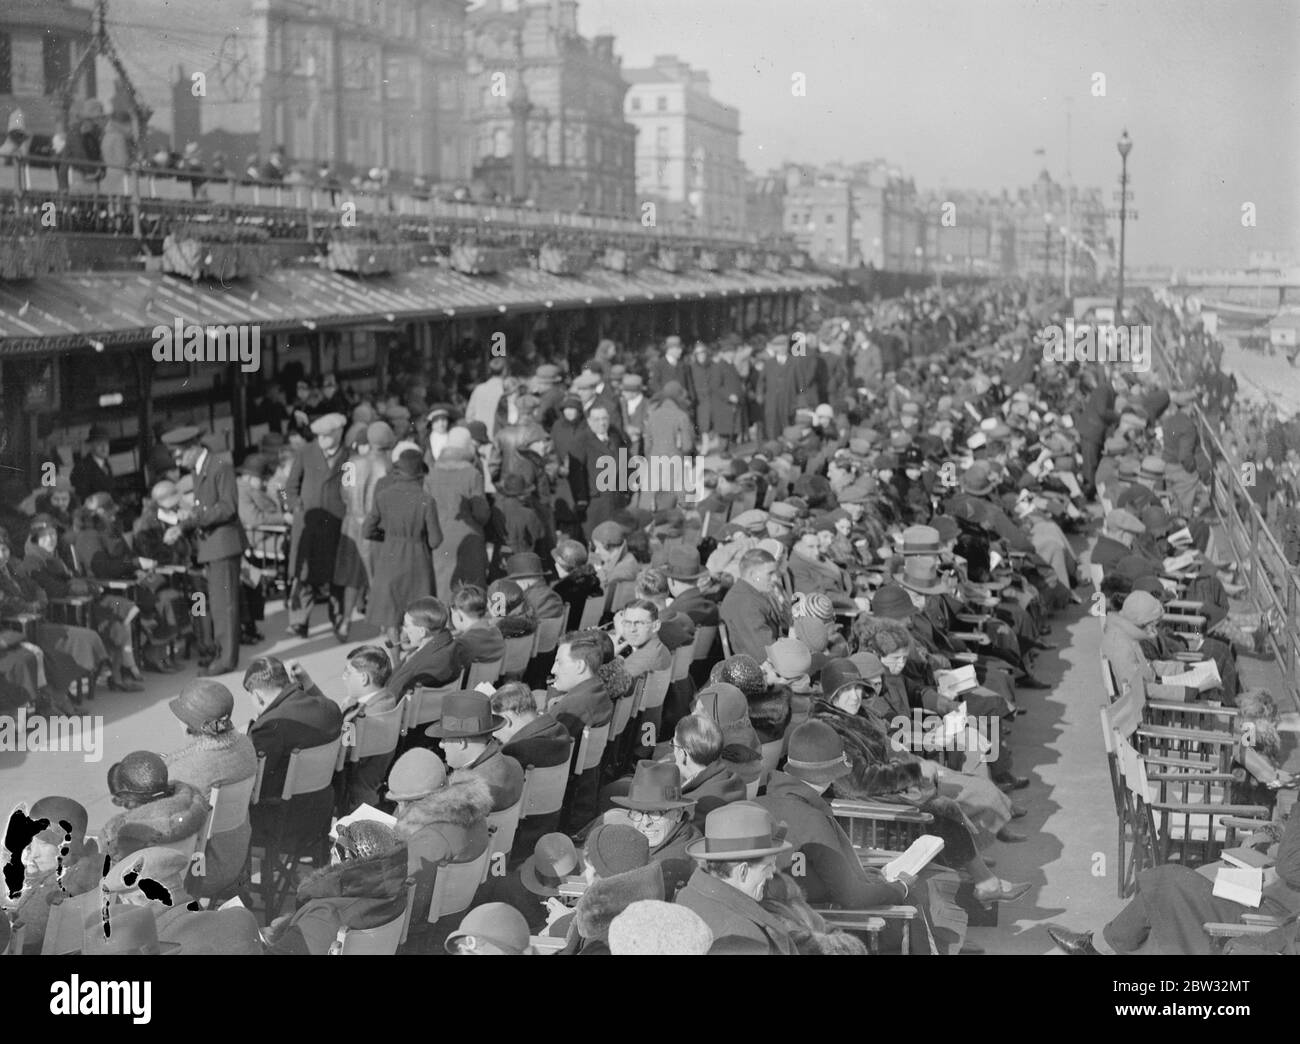 Holiday beach loungers at Eastbourne . So warm has been the weather on the south coast that visitors have been enjoying the sunshine and sea breezes lounging on the beach . The scene on the beach at Eastbourne in the sunny weather .27 March 1932 Stock Photo